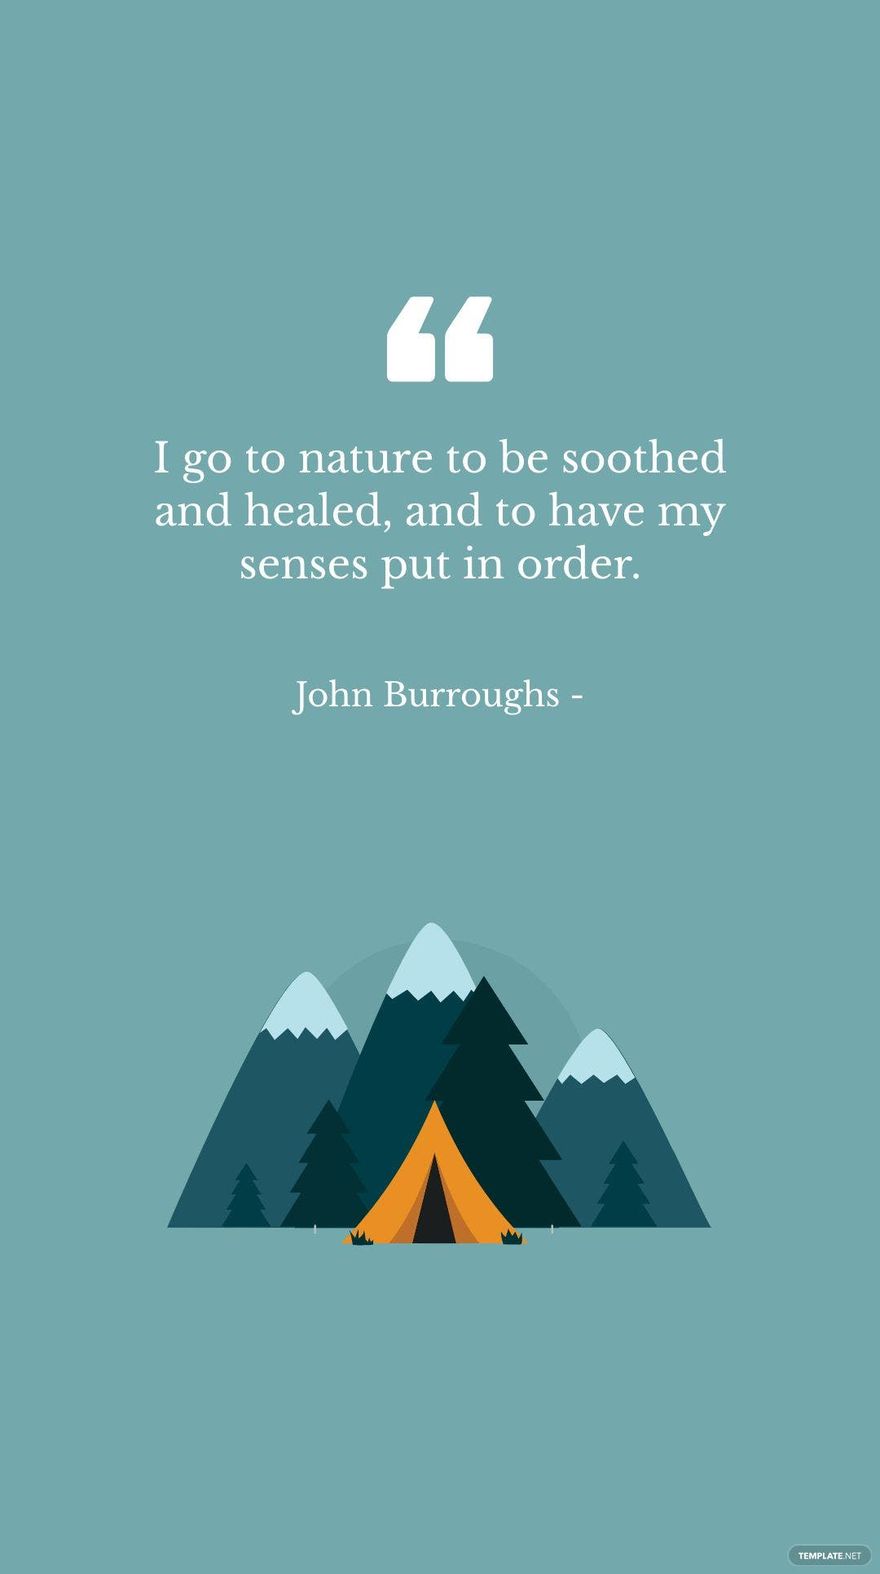 John Burroughs - I go to nature to be soothed and healed, and to have my senses put in order. in JPG